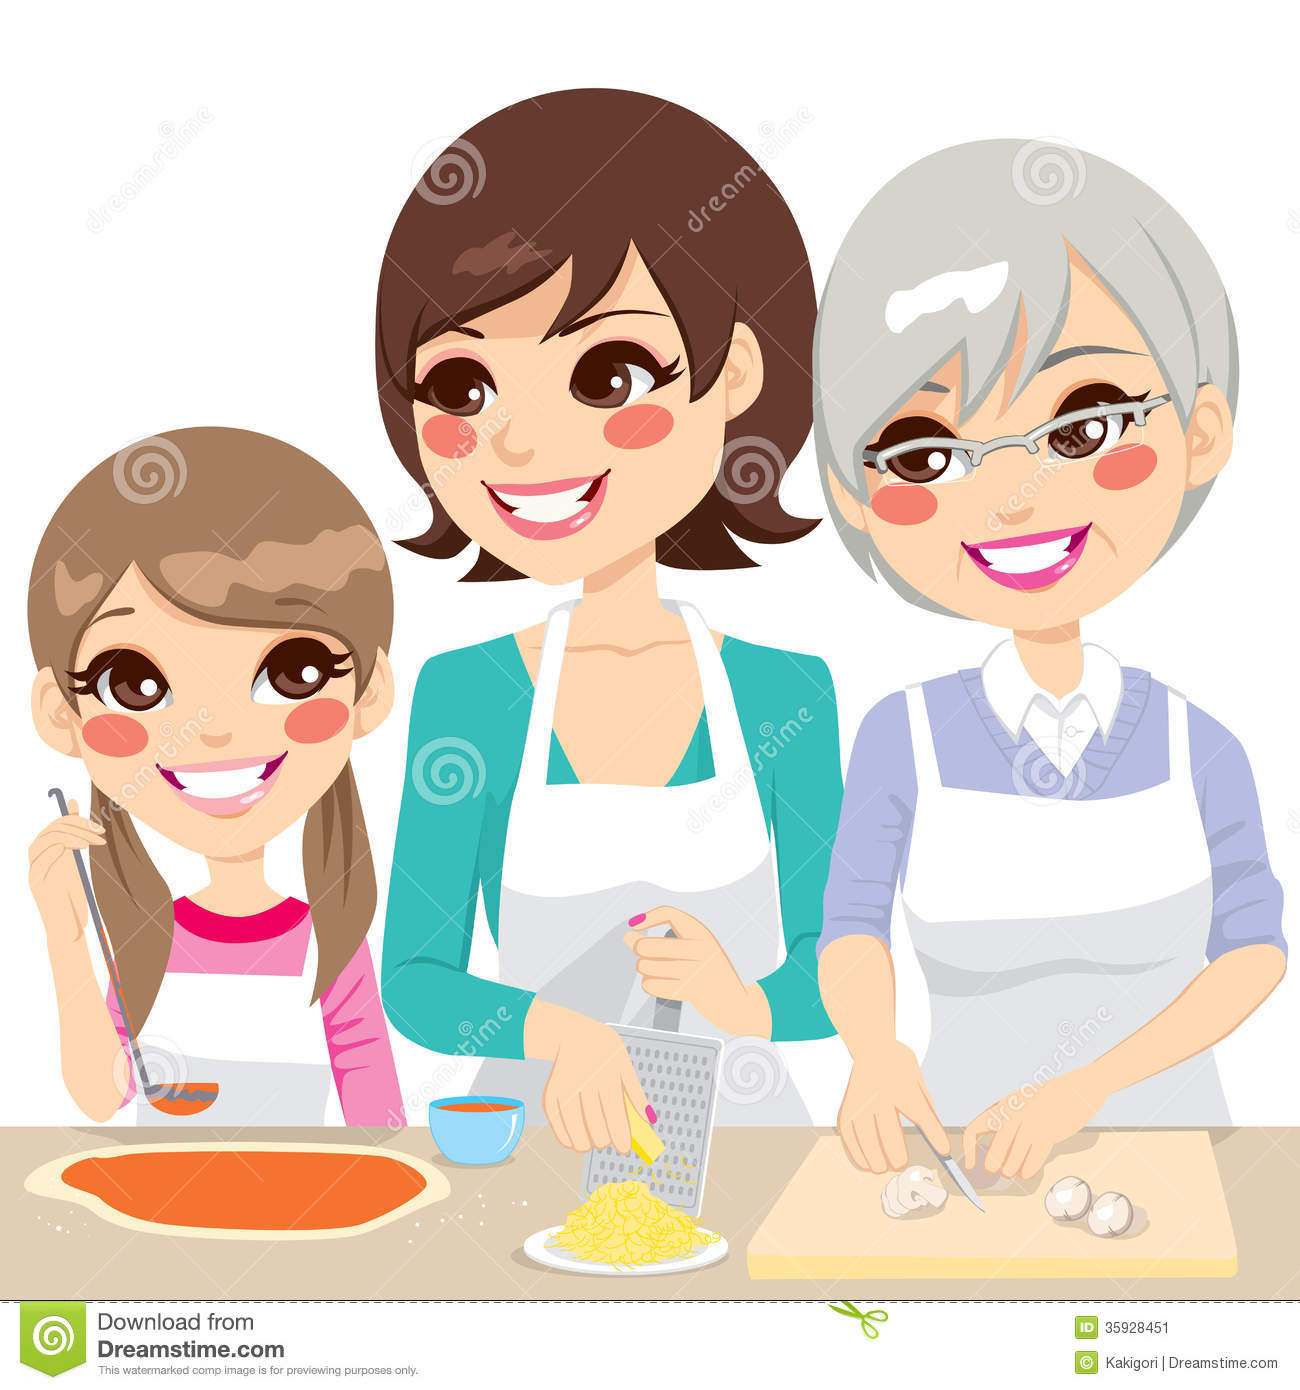 Family Cooking Pizza Together Stock Image   Image  35928451